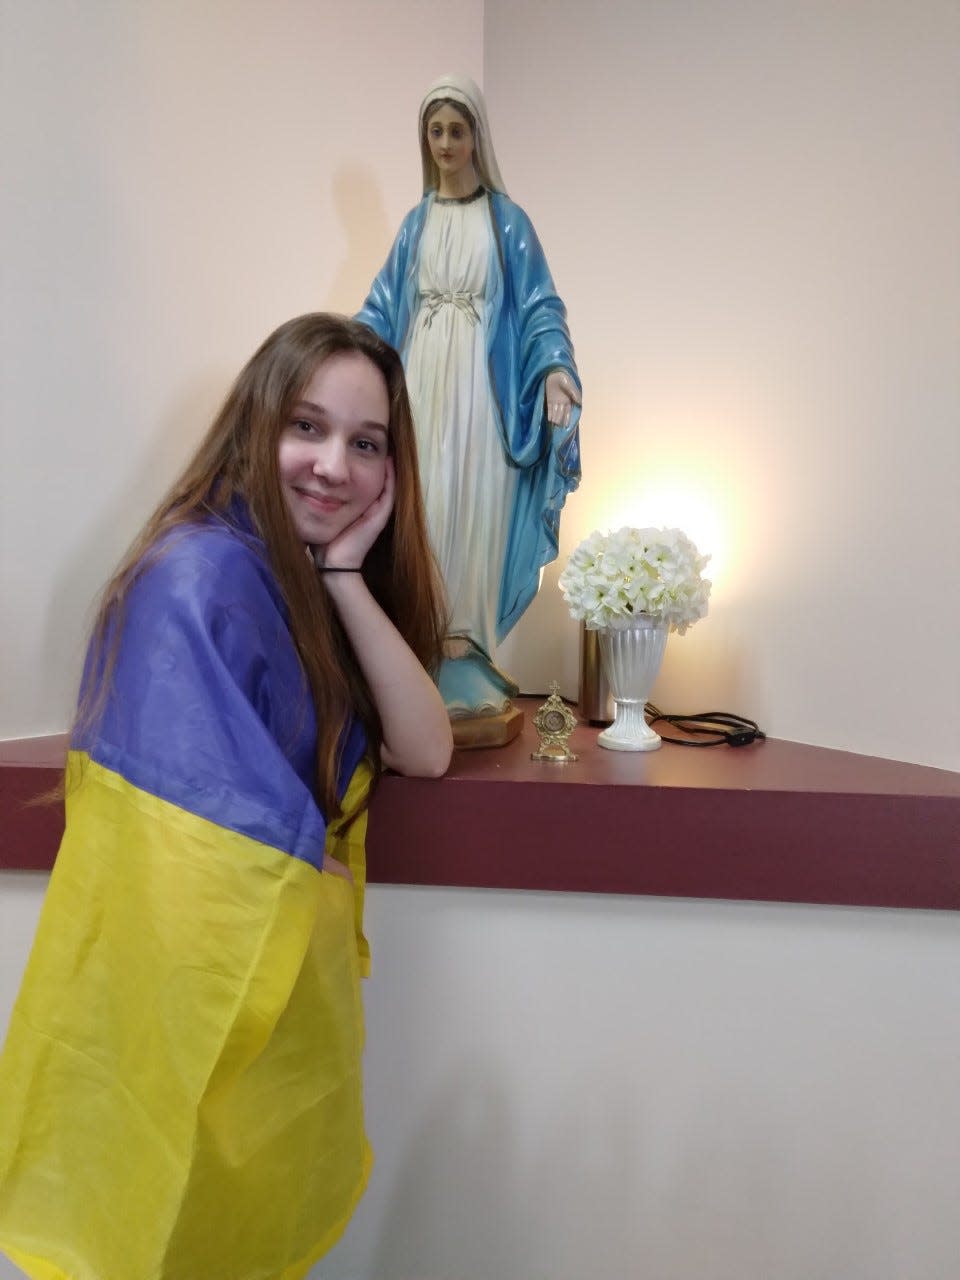 Ukrainian exchange student Anastasia Didenko stands with a statue of the Blessed Virgin Mary at Tuscarawas Central Catholic Junior/Senior High School.